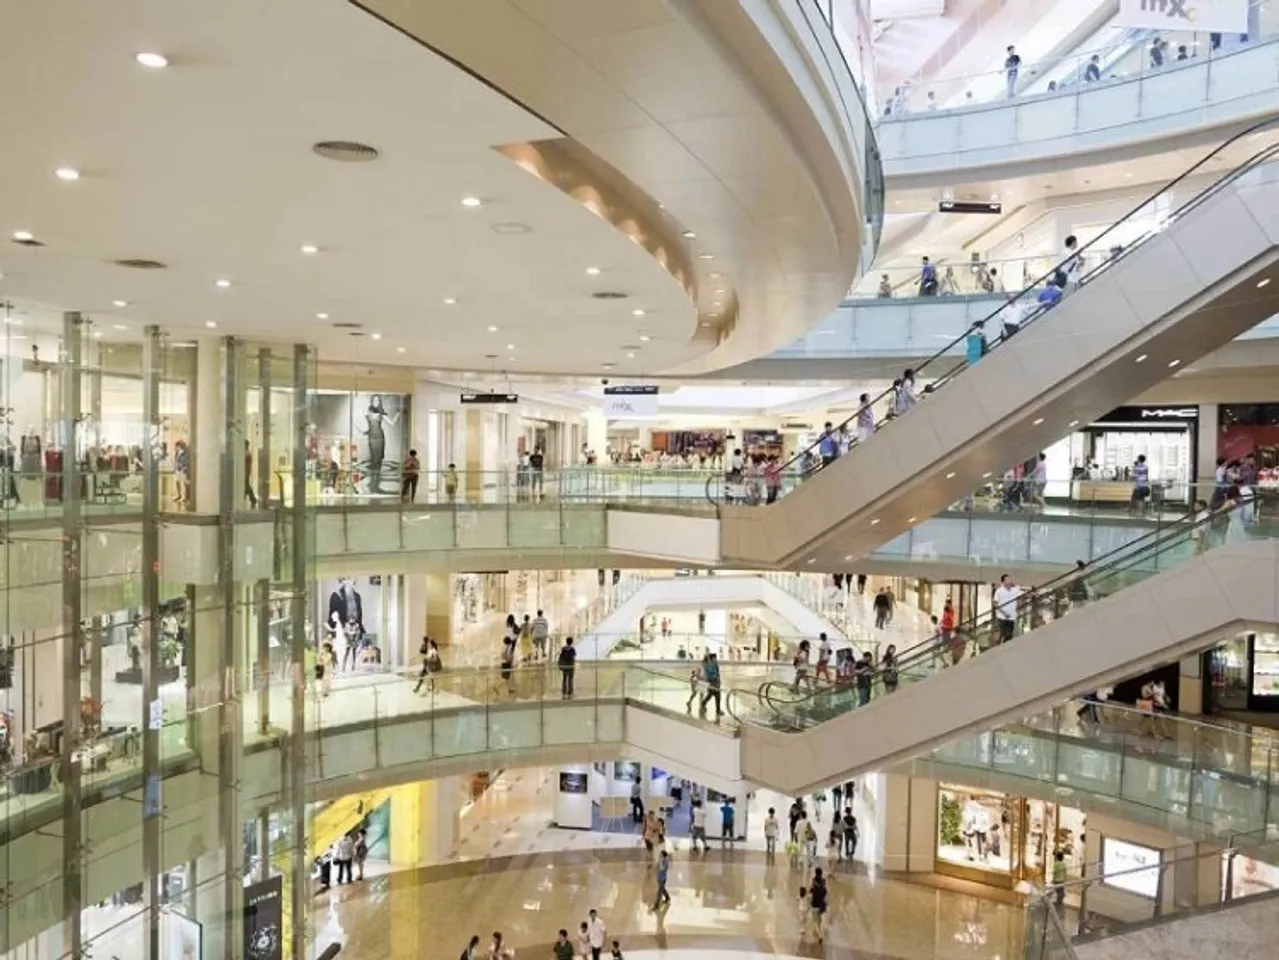 Number of ghost shopping malls rise to 64 in 2023 across 8 major cities: Report